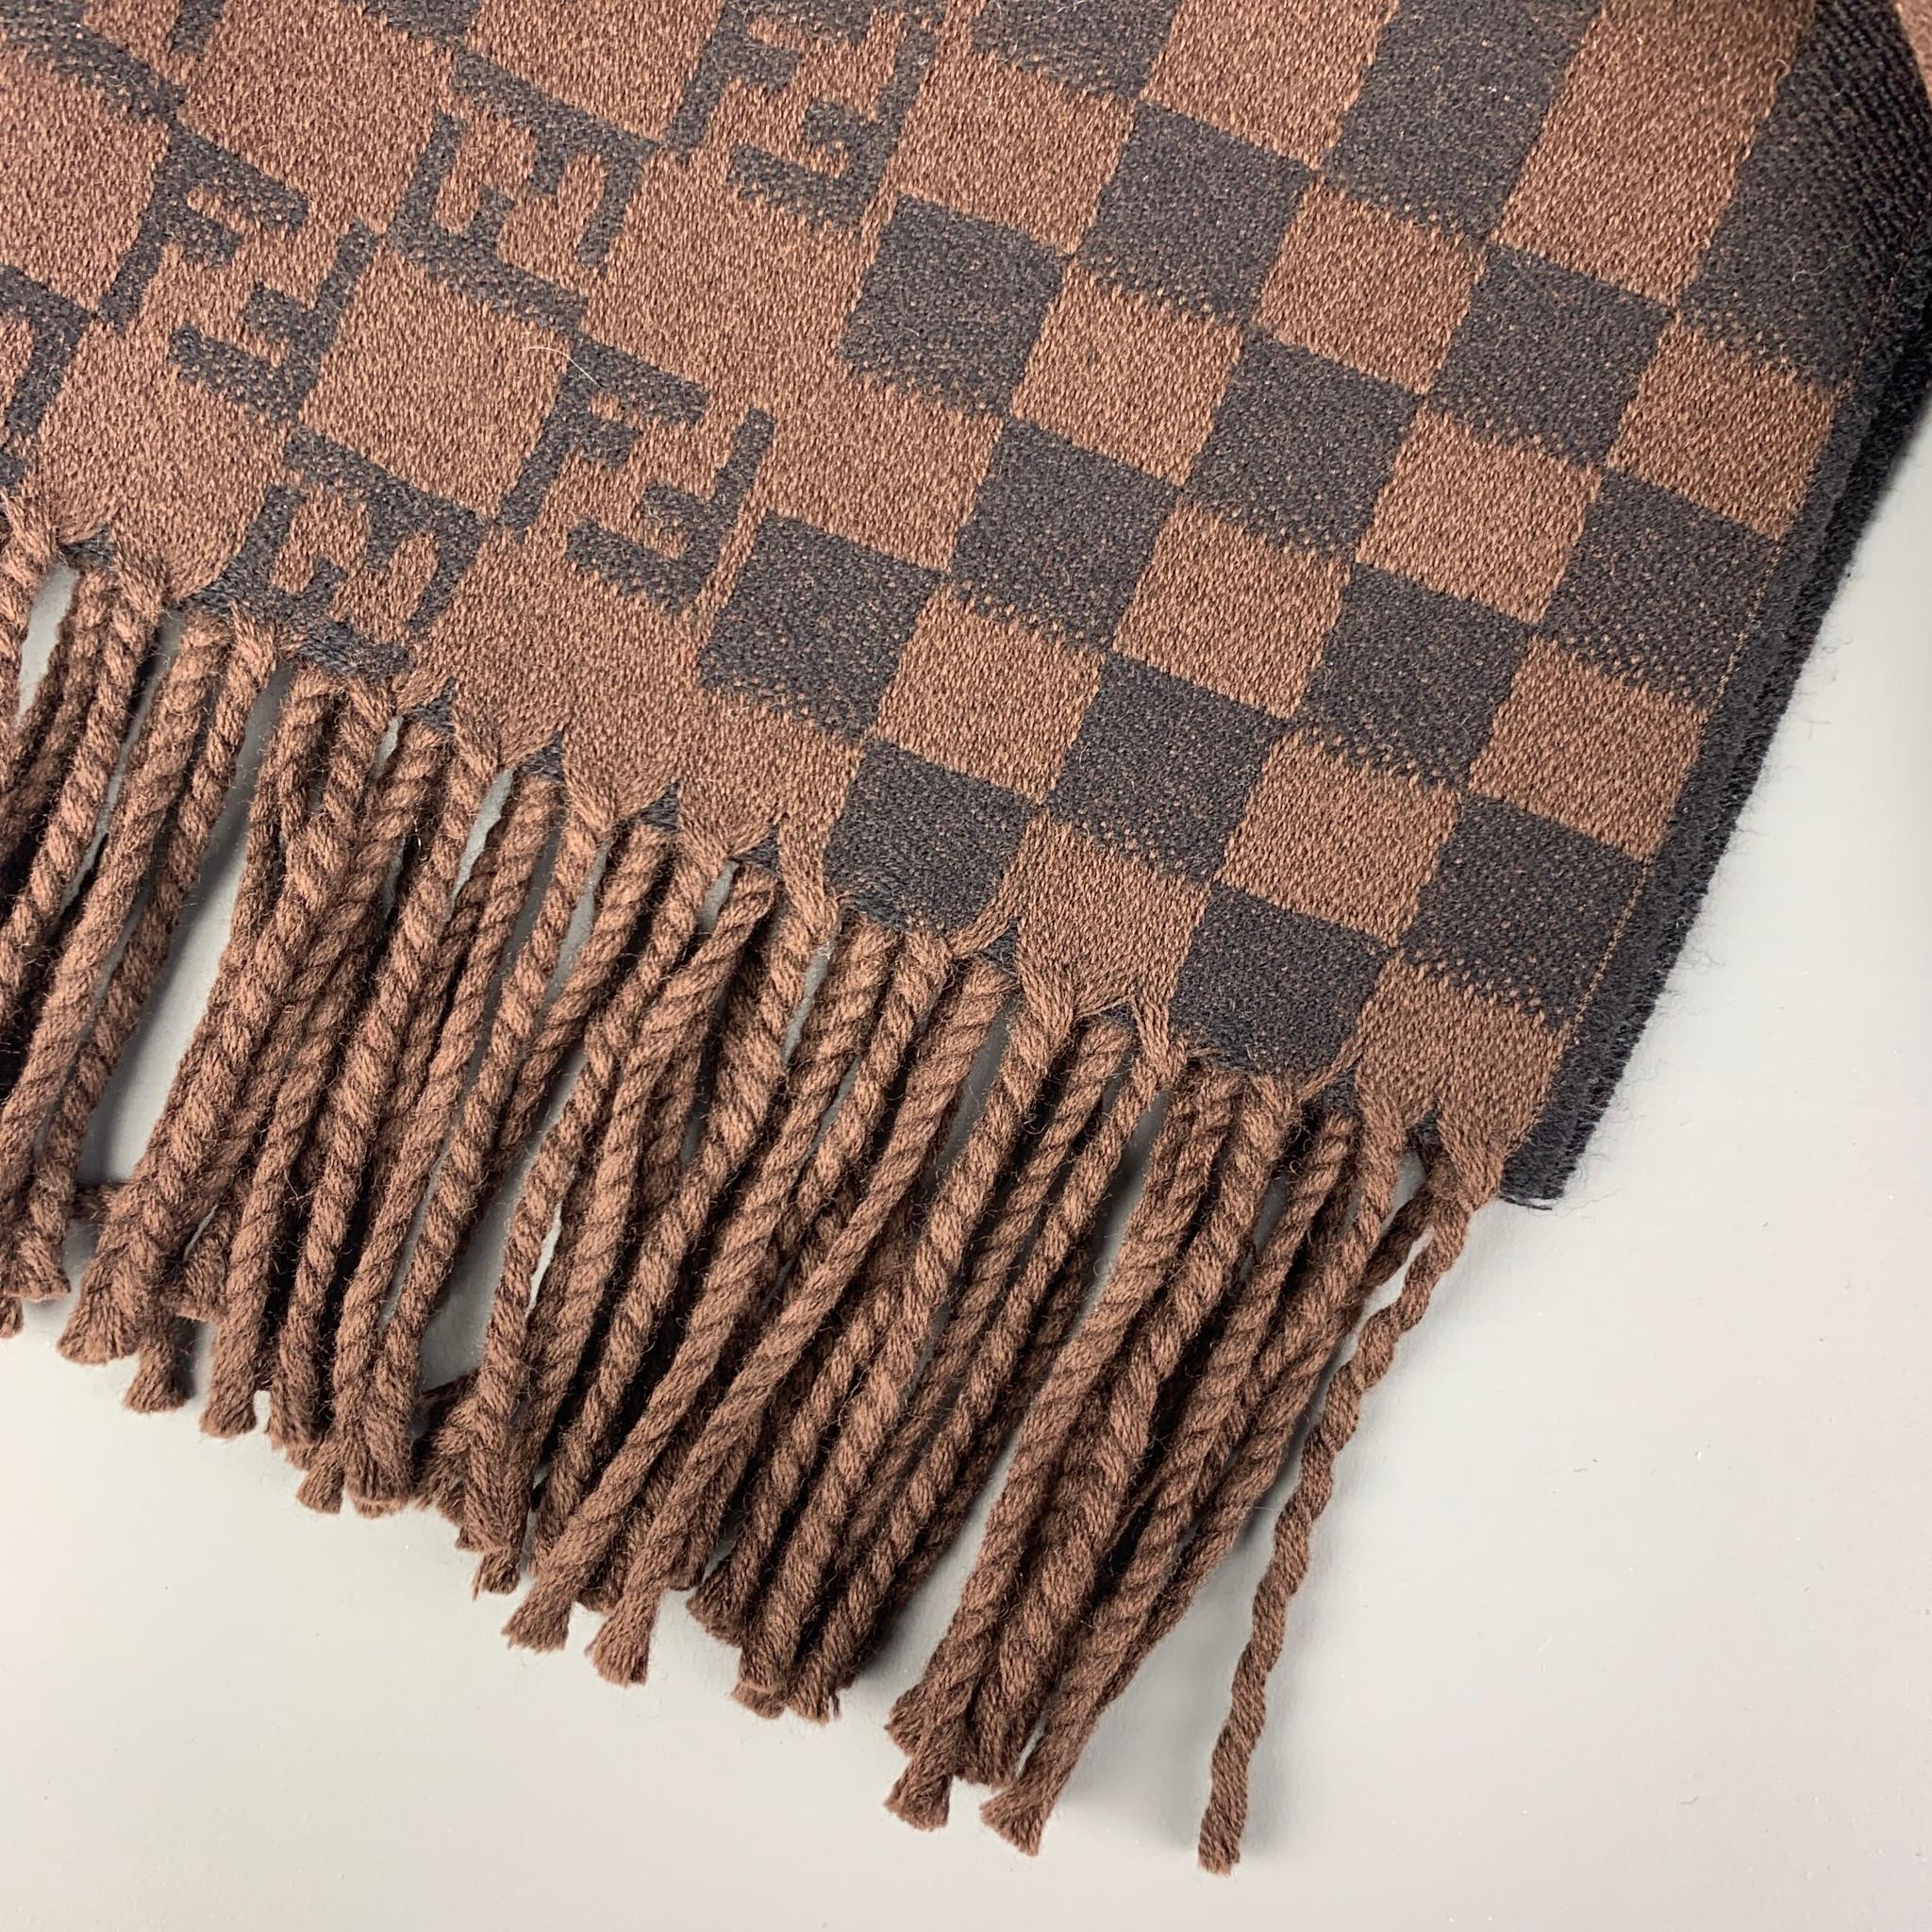 FENDI scarf comes in a brown & black logo wool with a three and a half fringe trim. Made in Italy. 

New With Tags. 

Measurements:

65 in. x 15 in